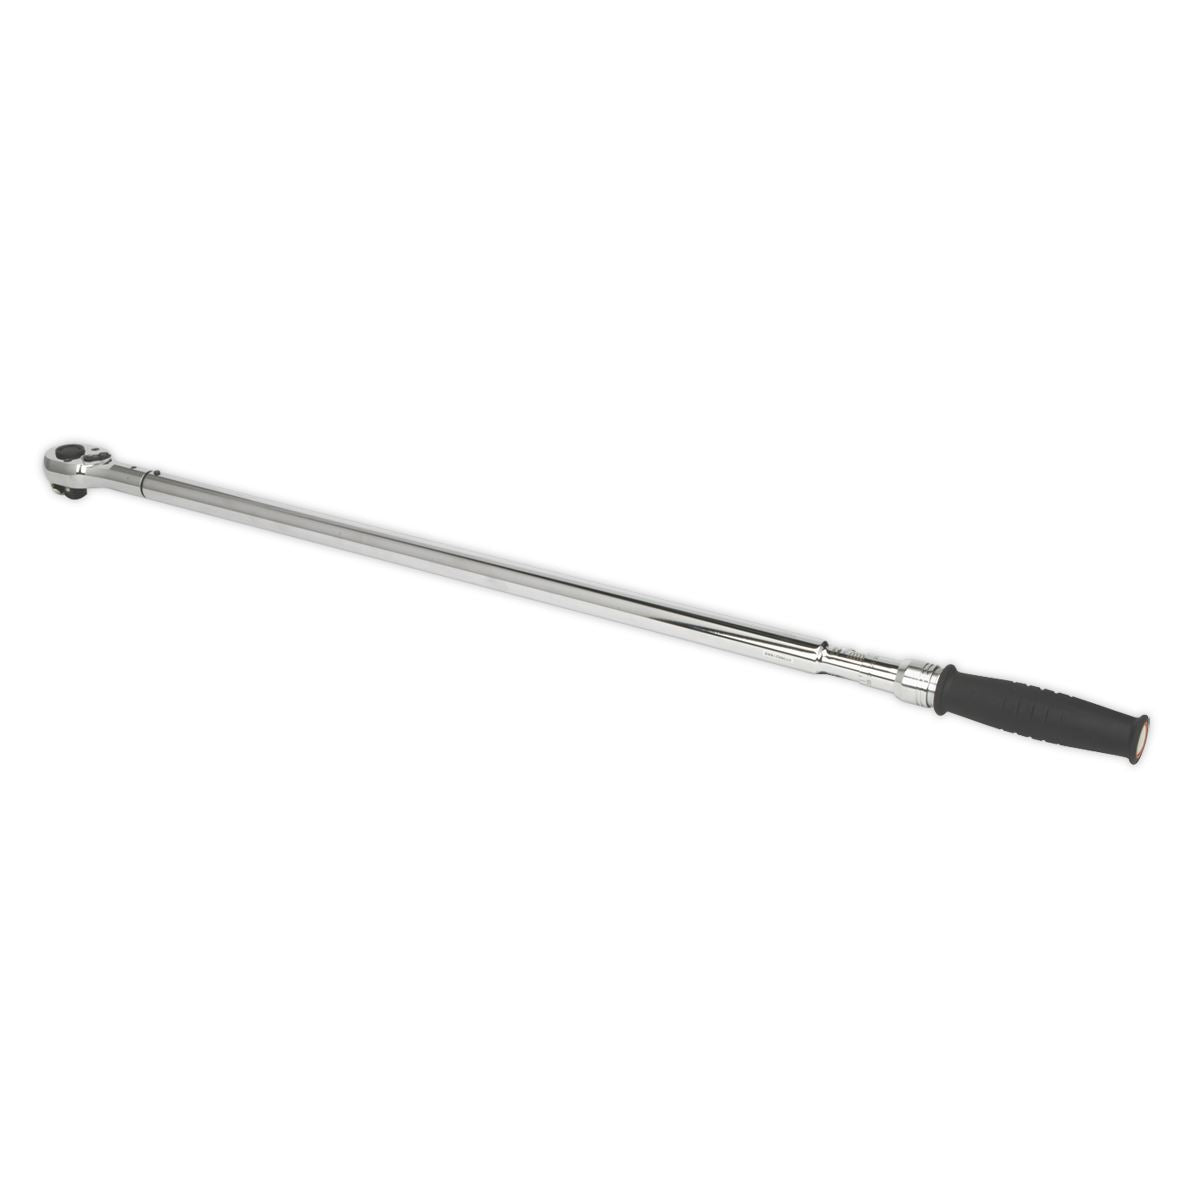 Sealey Premier Torque Wrench 3/4"Sq Drive 237-983Nm(150-750lb.ft) Push-Through Calibrated